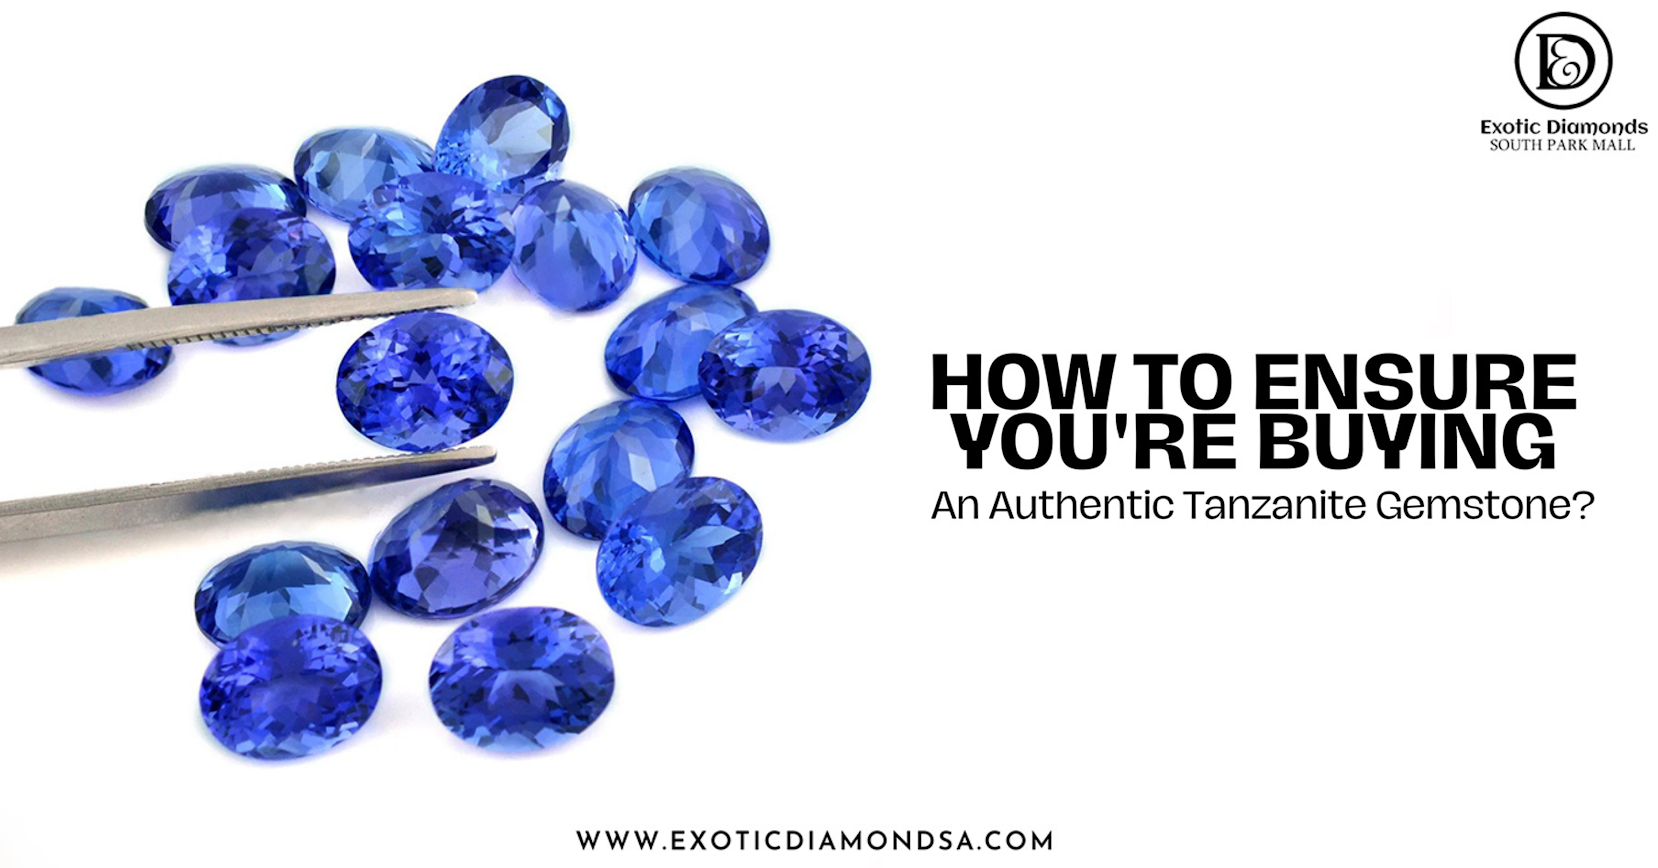 HOW TO ENSURE YOU'RE BUYING An Authentic Tanzanite Gemstone?